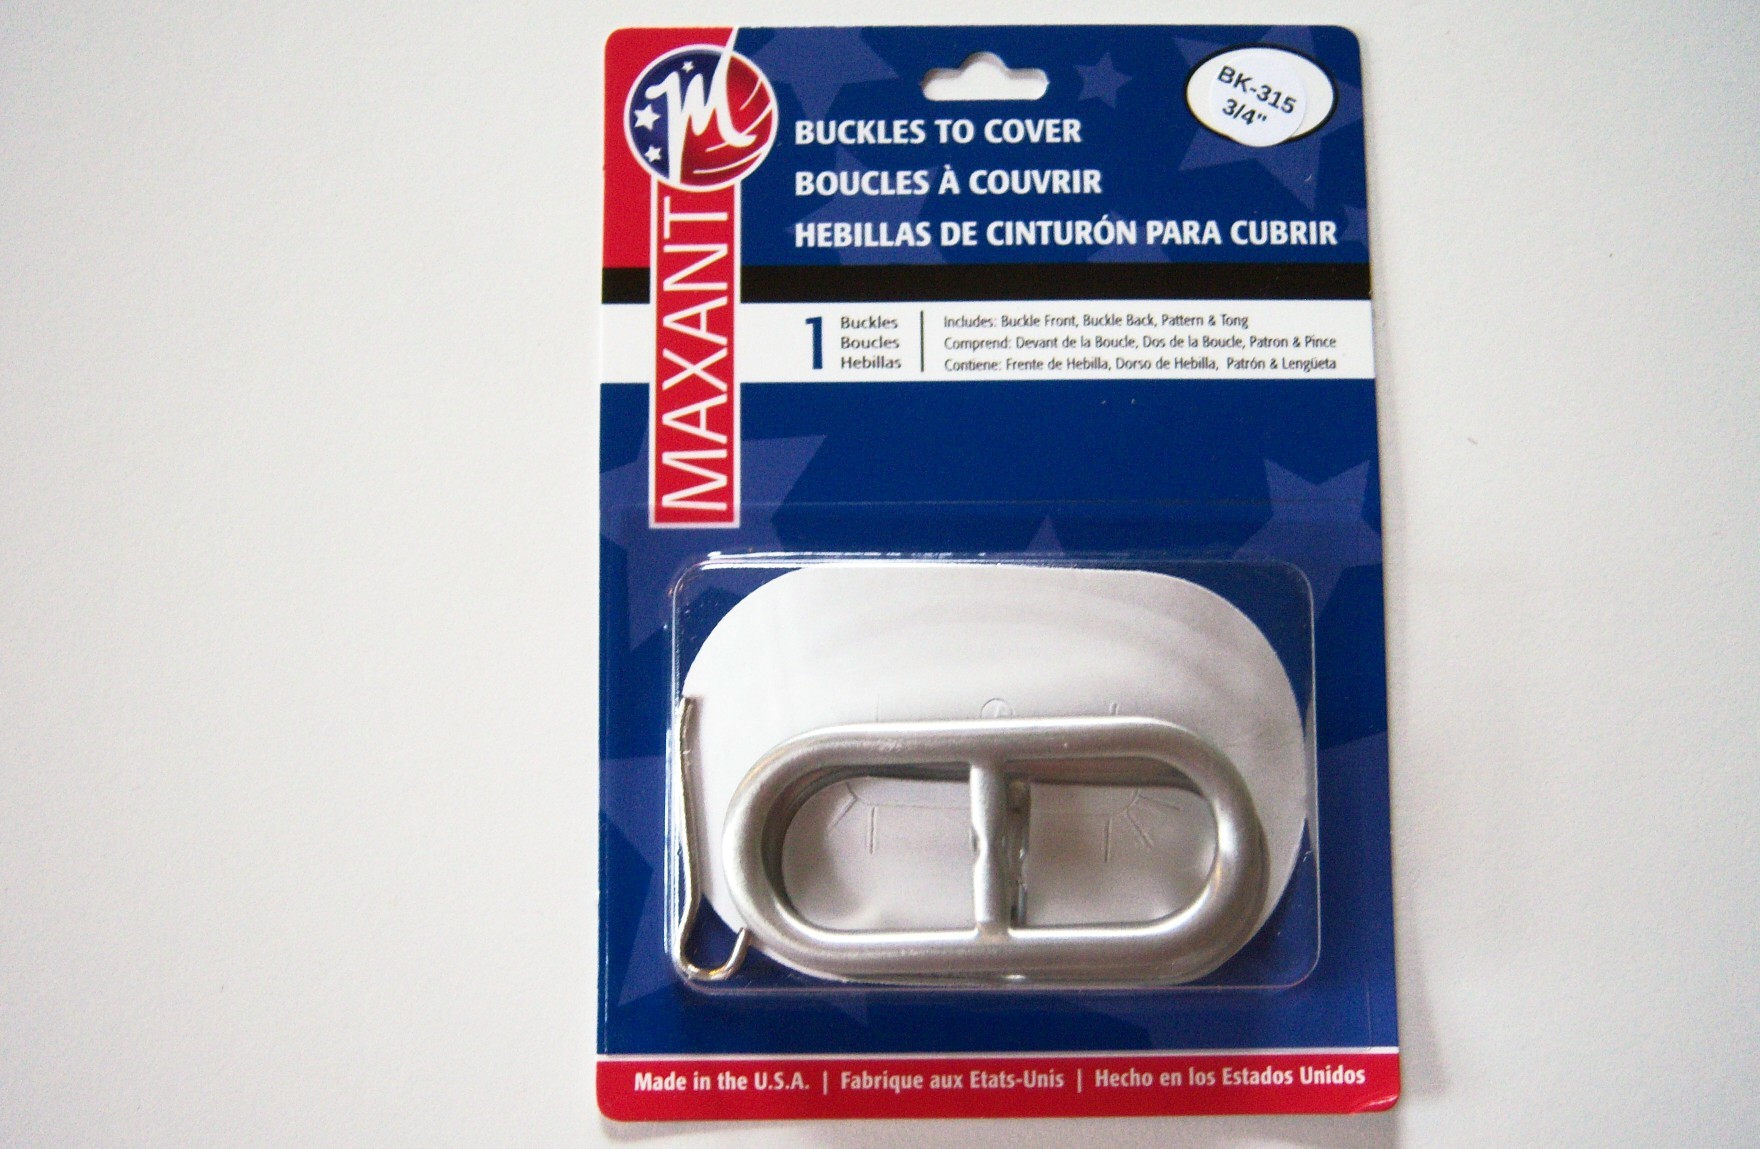 BK-315 Maxant 3/4" Buckle To Cover